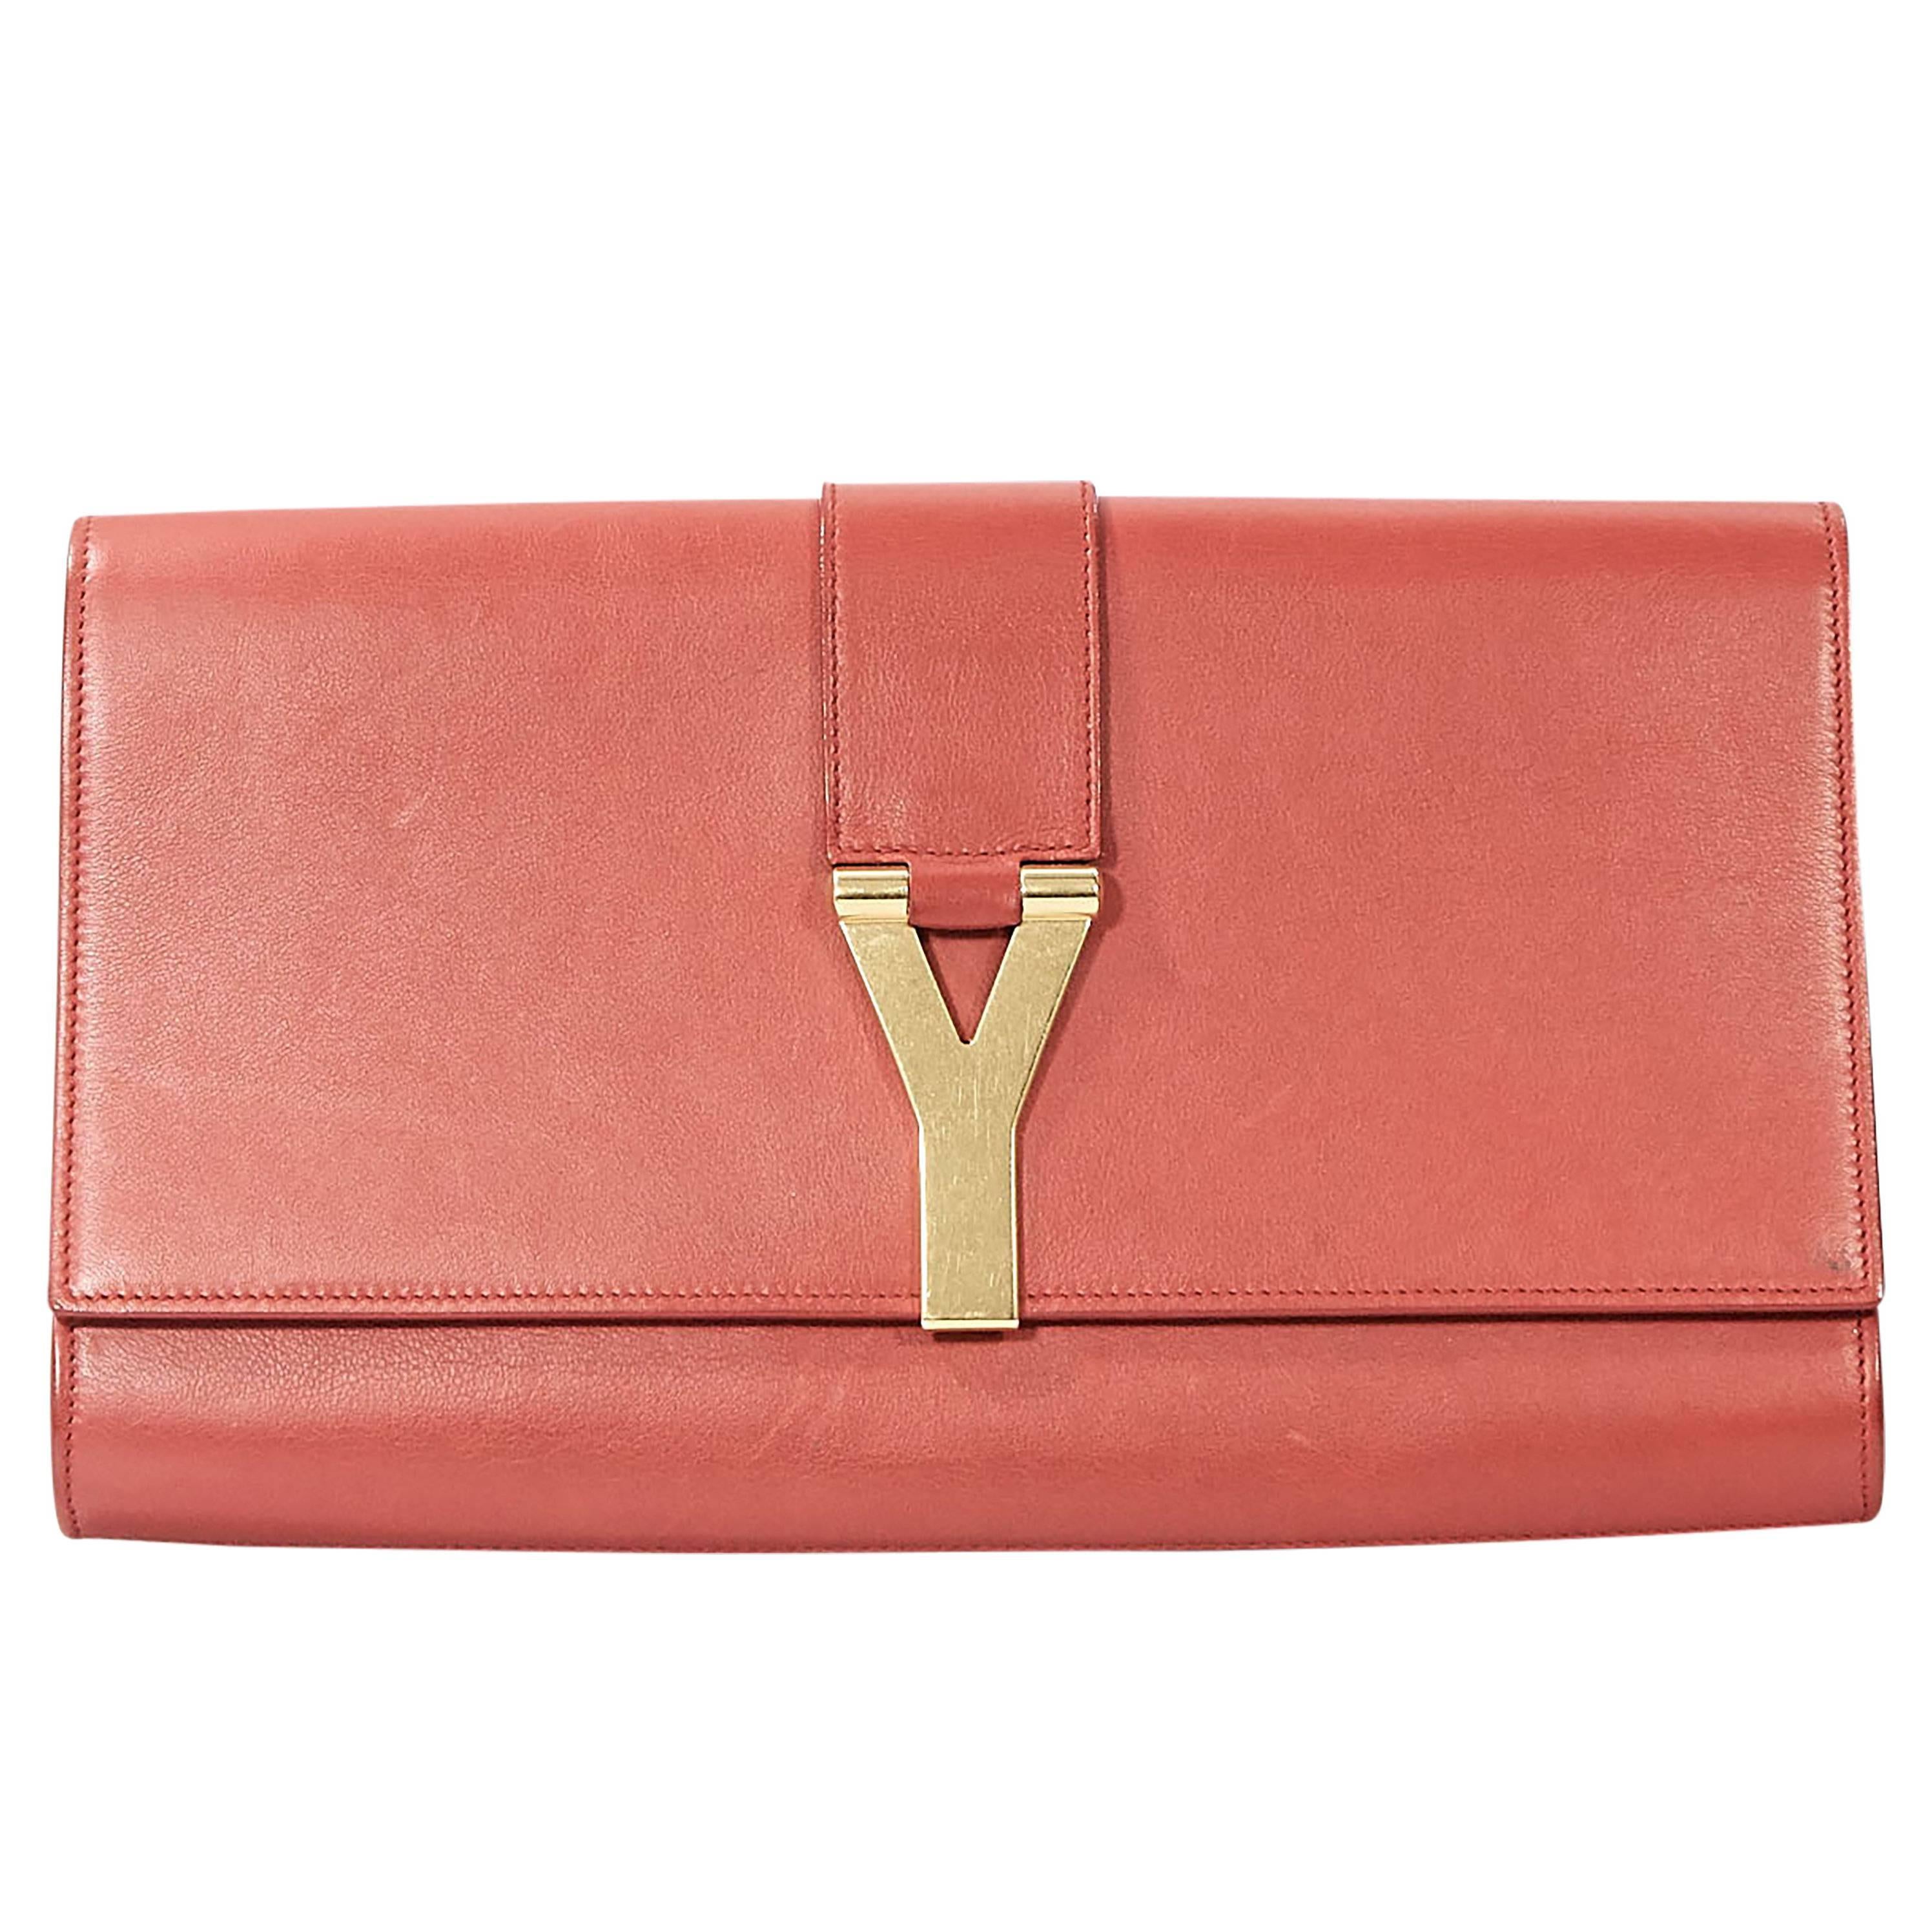 Red Yves Saint Laurent Chyc Clutch